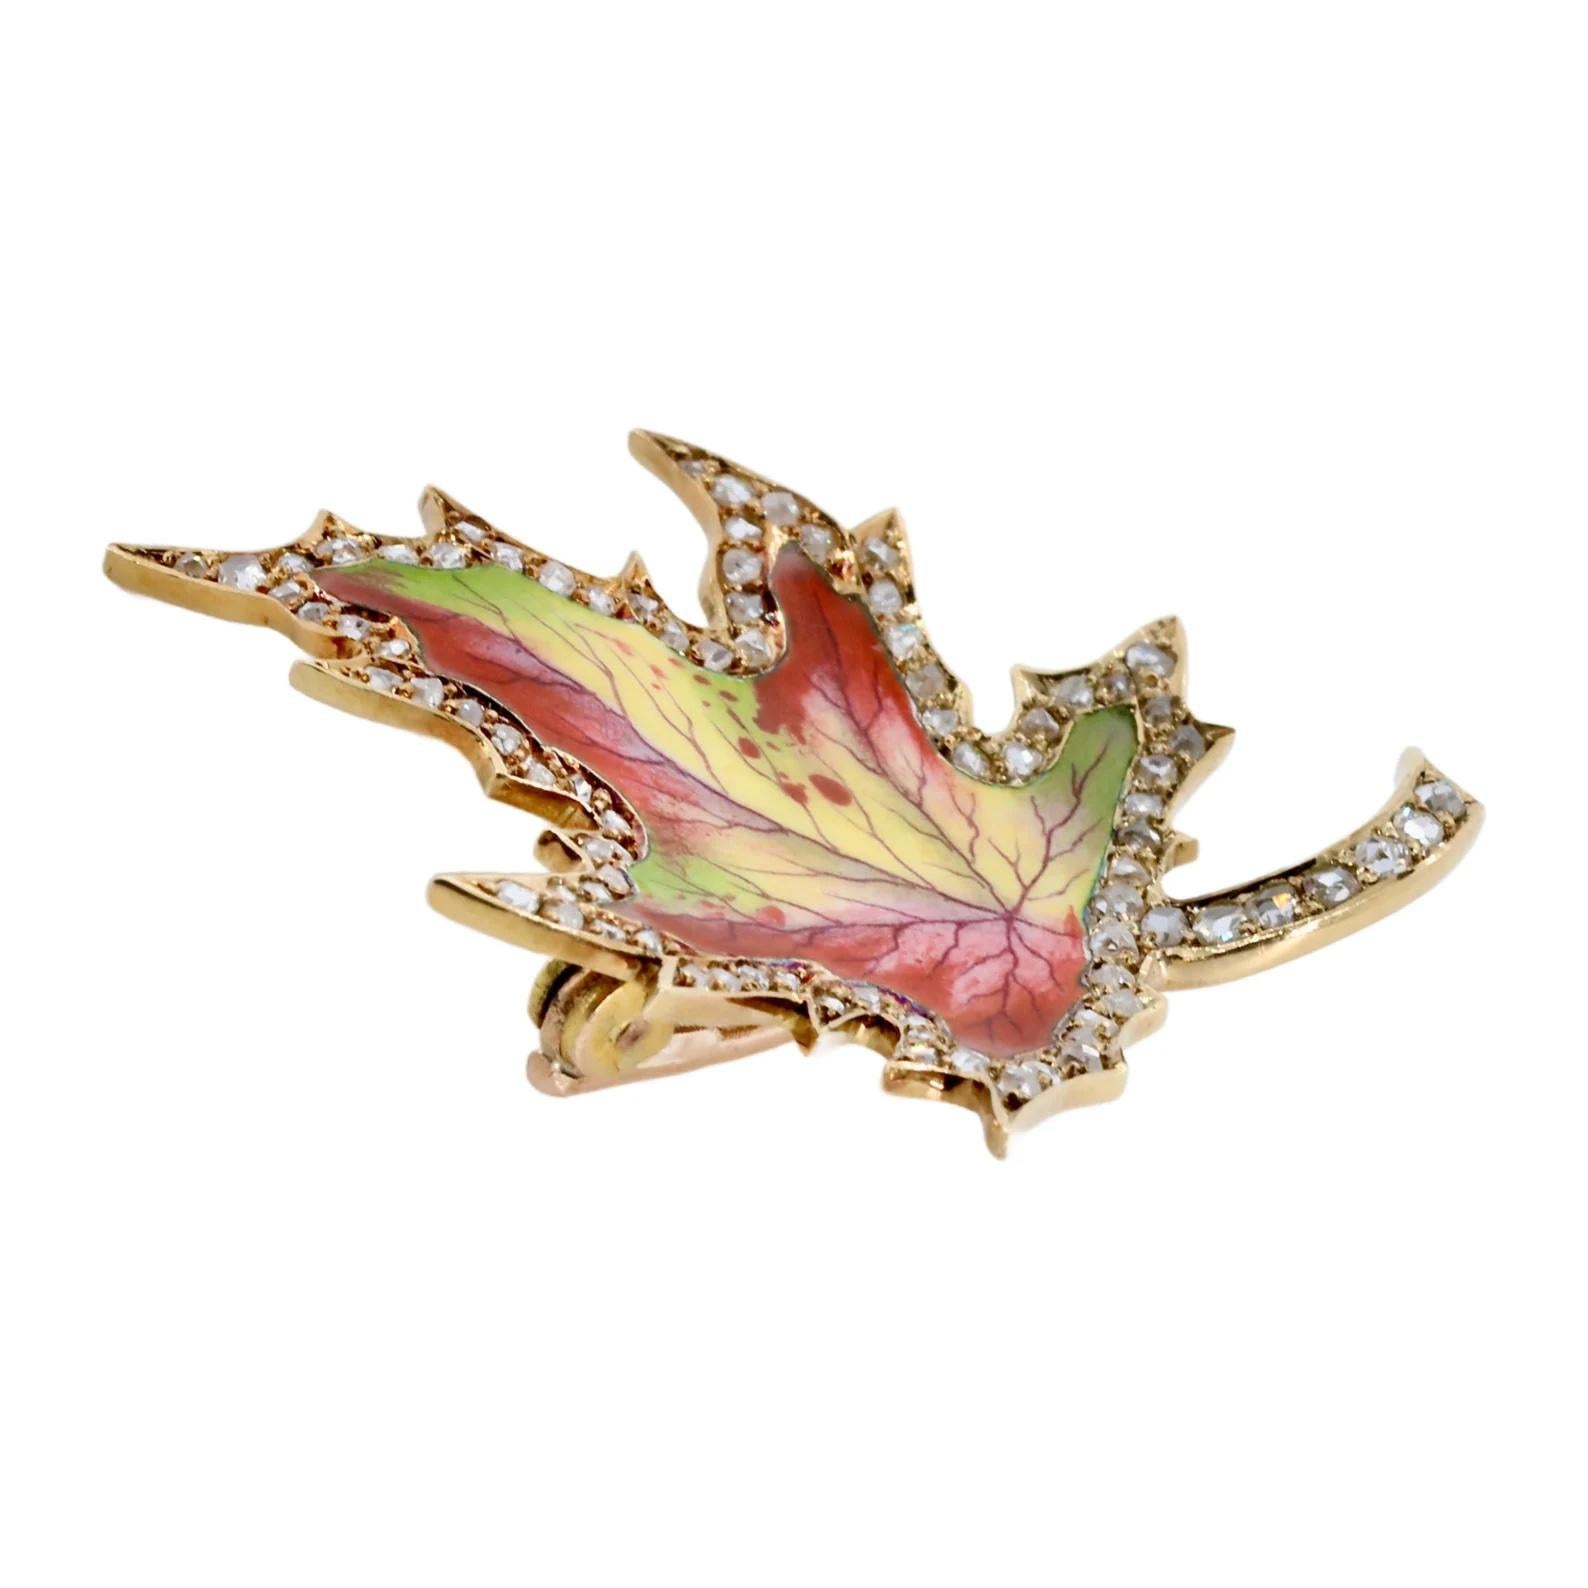 A beautifully enameled victorian period maple leaf brooch by Birks of Canada. Embellished with rich enamel depicting a wonderfully lifelike Canadian maple leaf in shades of red, green, yellow, and even purple. Framed by a border of pave set rose cut